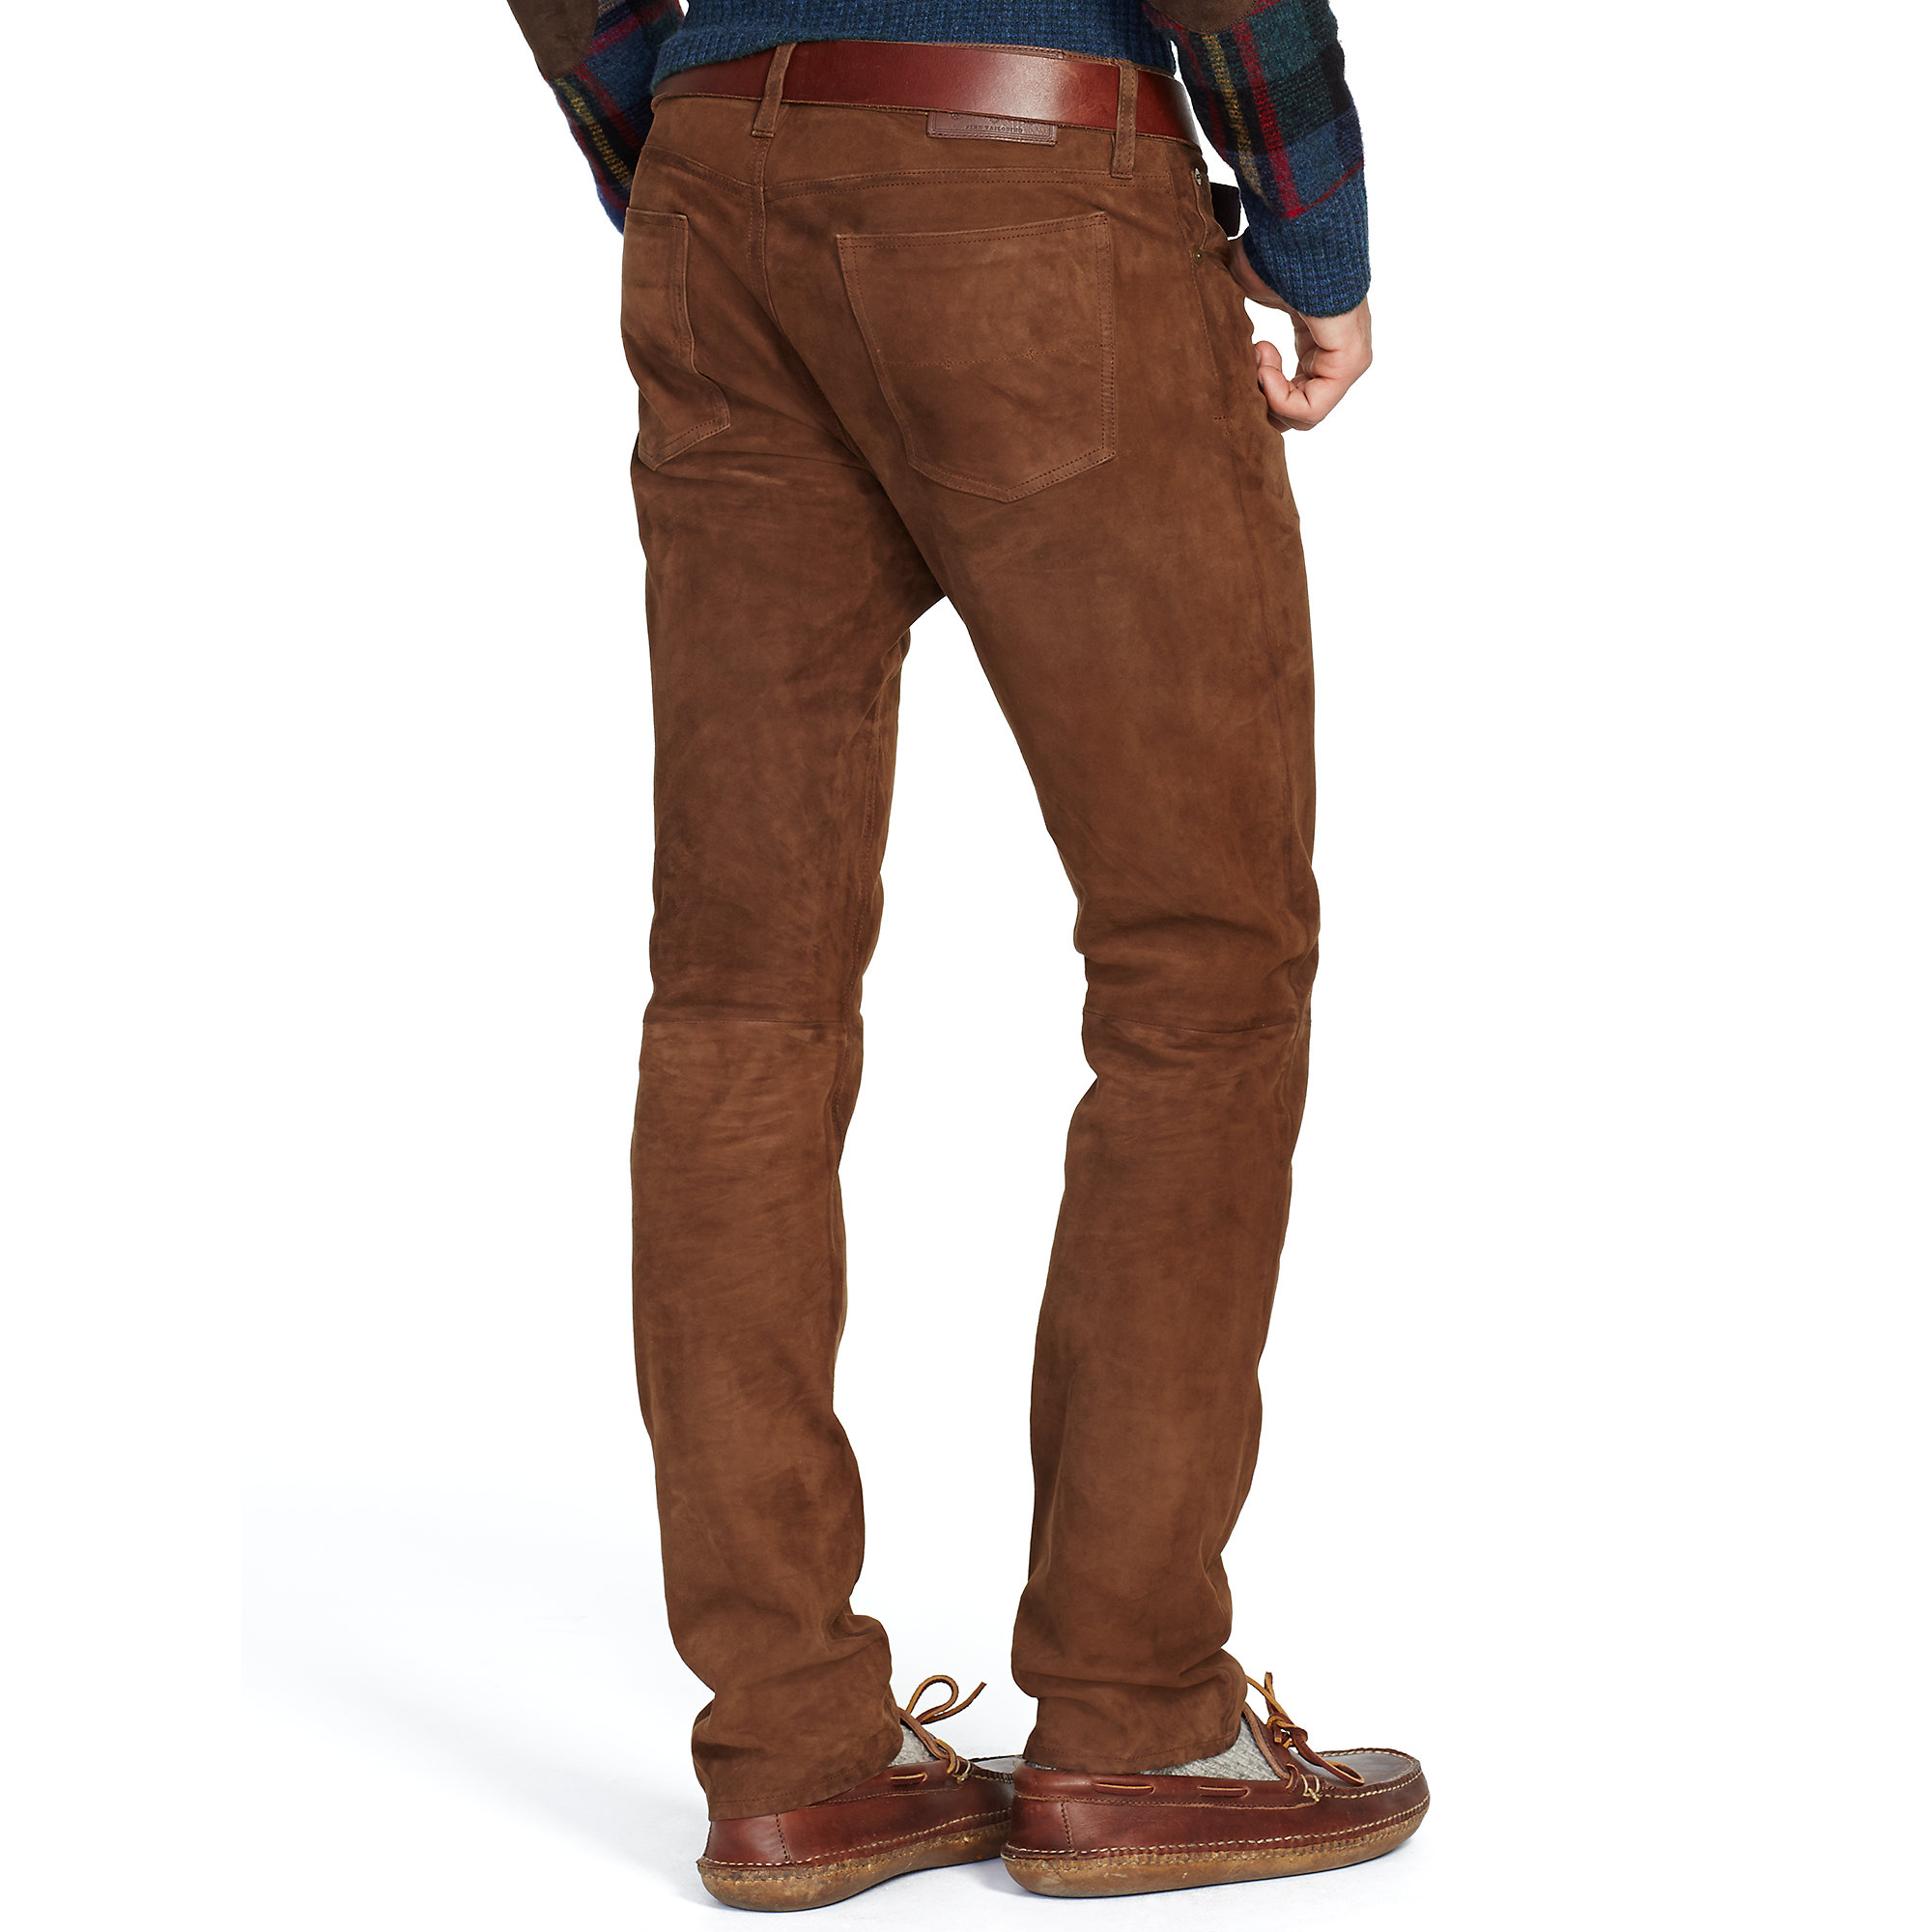 Polo Ralph Lauren Slim Straight Suede Pant in Brown for Men - Lyst